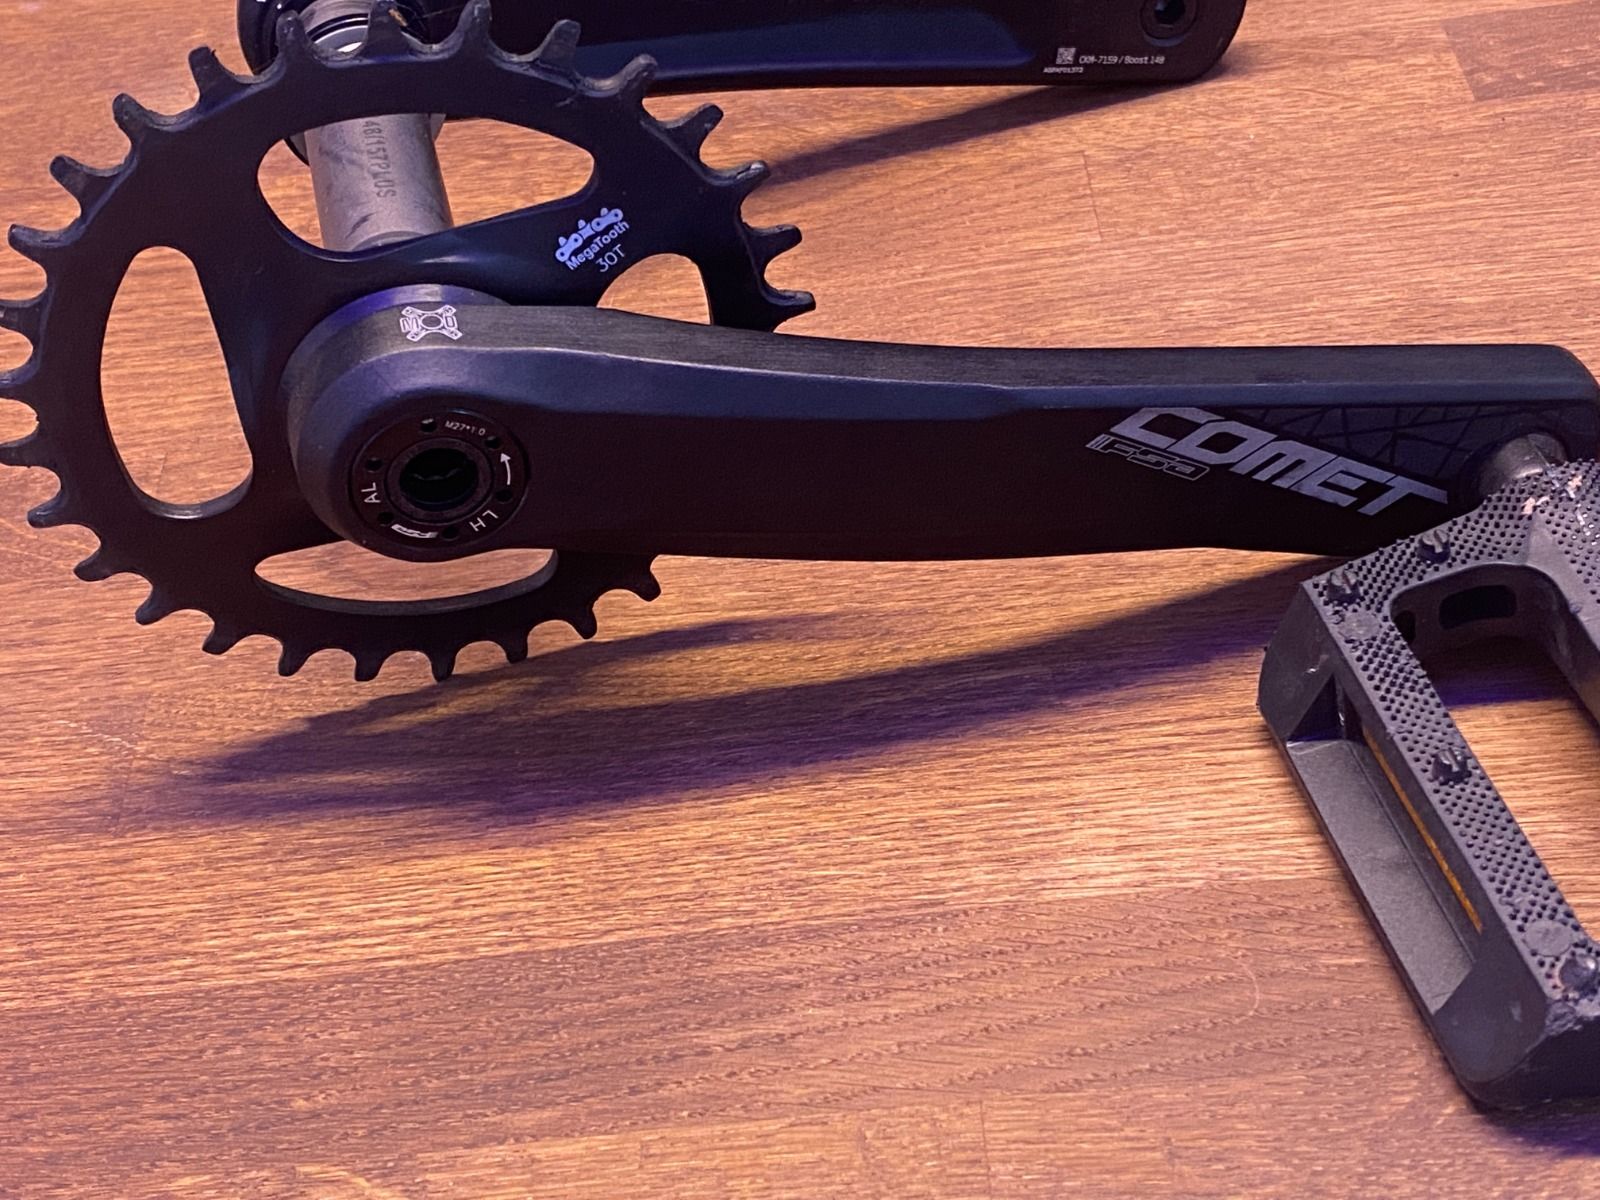 FSA Comet, Modular 1x, 30T Direct Mount Chainring, MegaTooth Technology, Boost Spacing